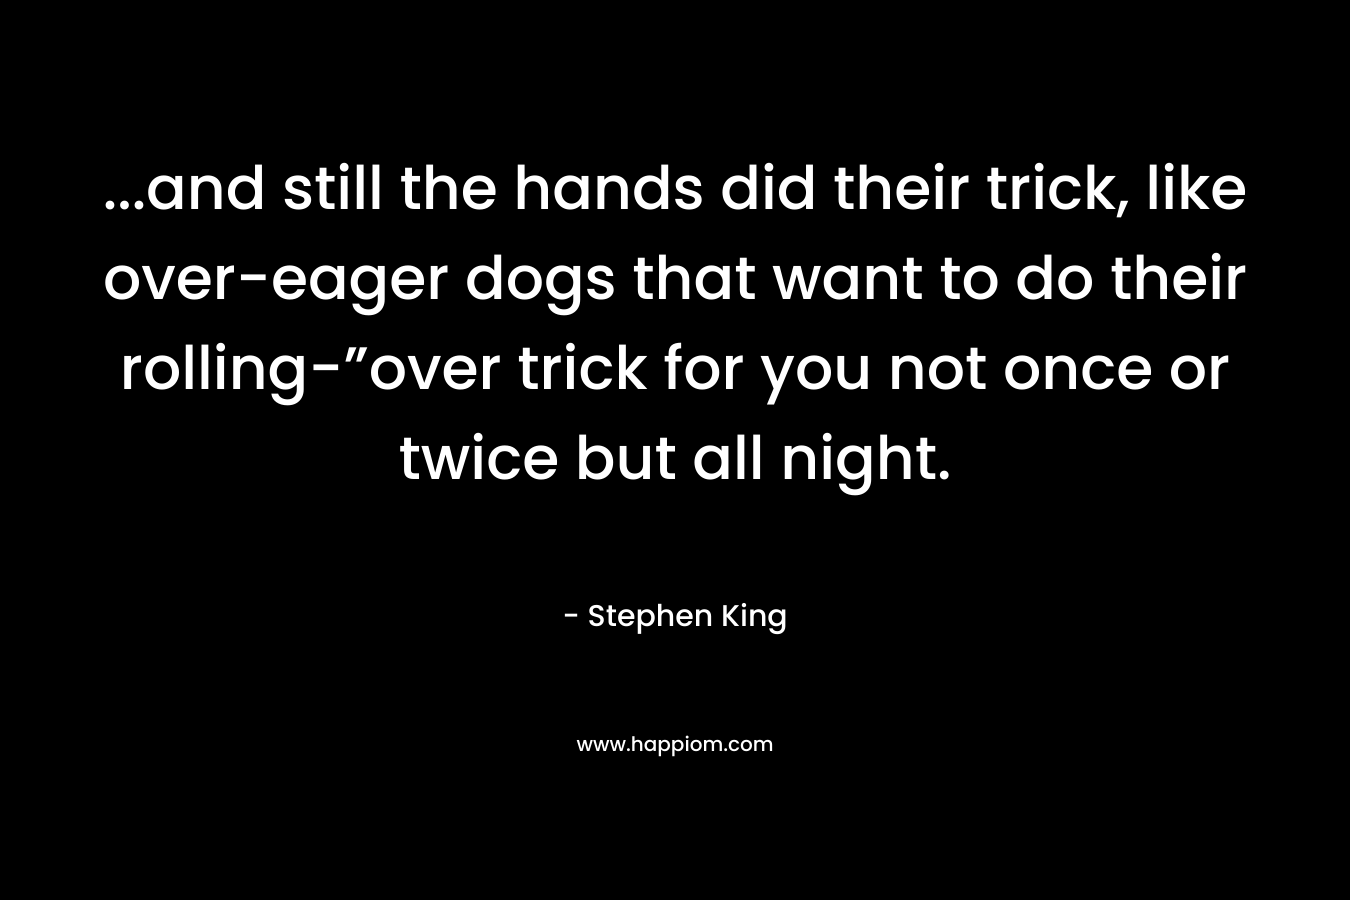 ...and still the hands did their trick, like over-eager dogs that want to do their rolling-”over trick for you not once or twice but all night.